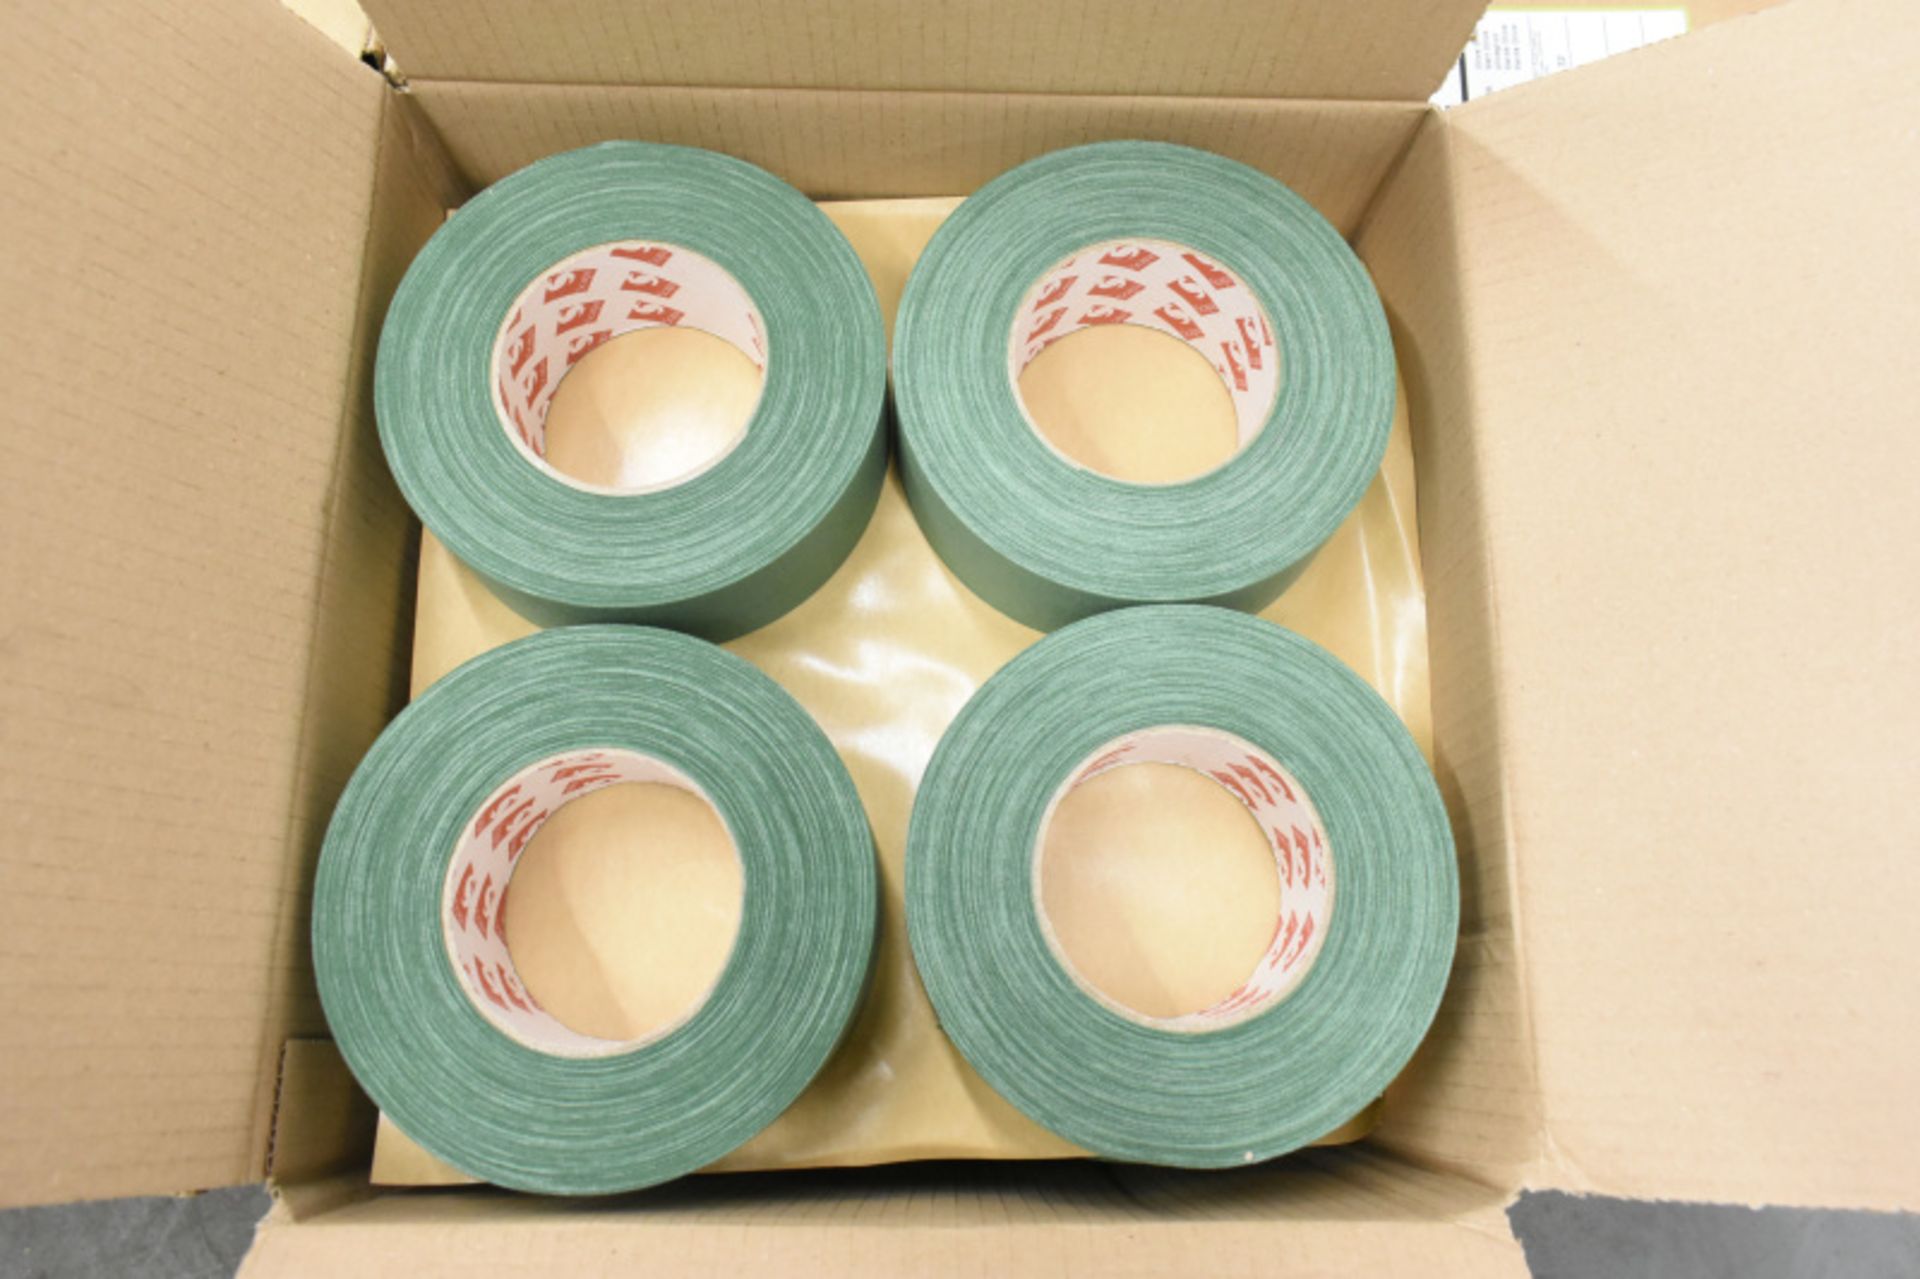 Scapa 3302 Pro Tape - Olive Green - 50mm x 50M rolls - 16 rolls per box - 33 boxes - Image 3 of 5